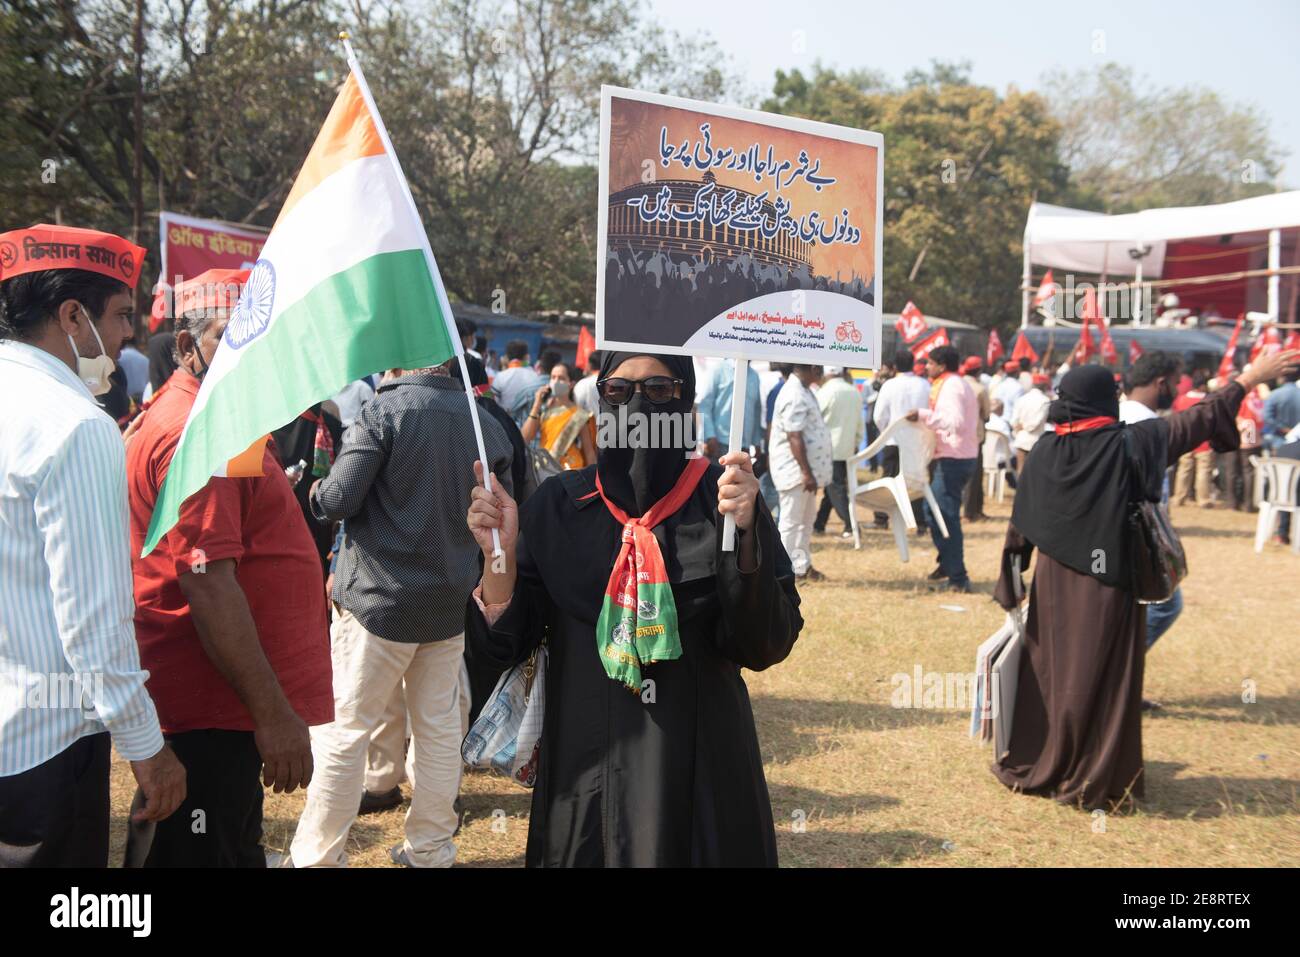 Mumbai , India - 25 January 2021, Muslim woman activists protesters in a black burqa hold up indian flag and signs in a rally at the Azad Maidan again Stock Photo